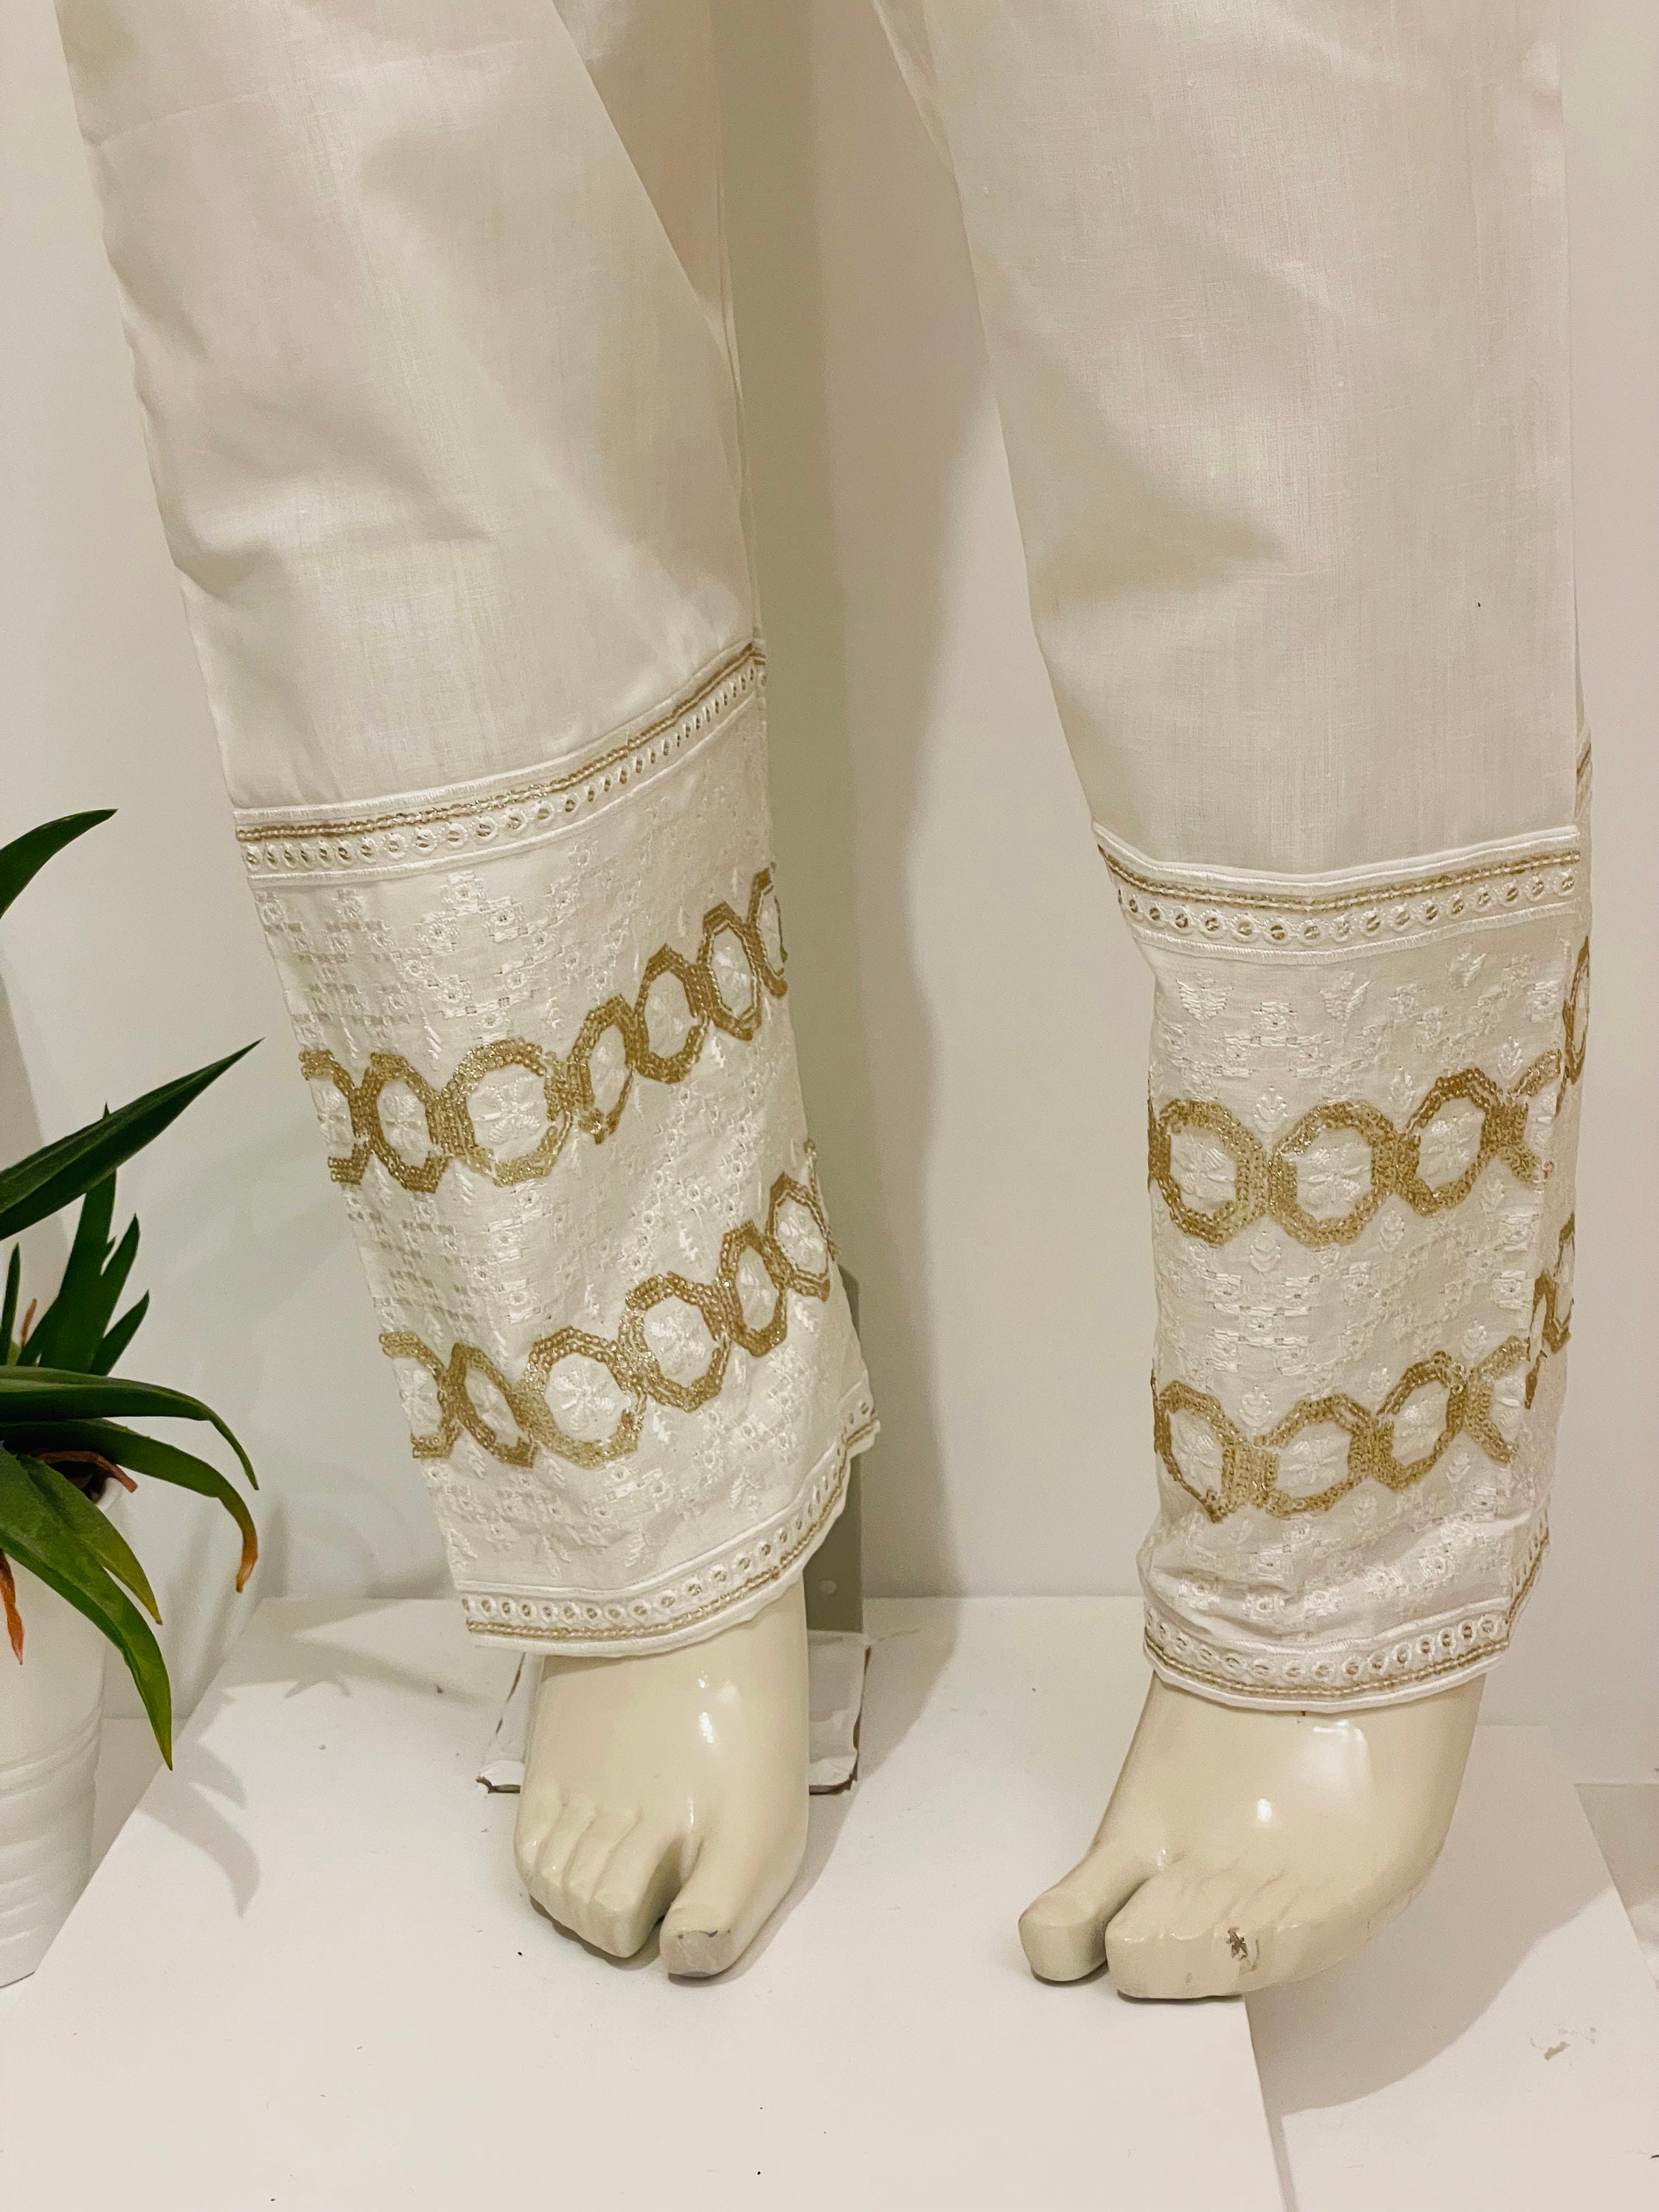 Indian Pakistani Embroidered Trousers Cigarette Pants Pure cotton slim fit  trousers pencil style pants